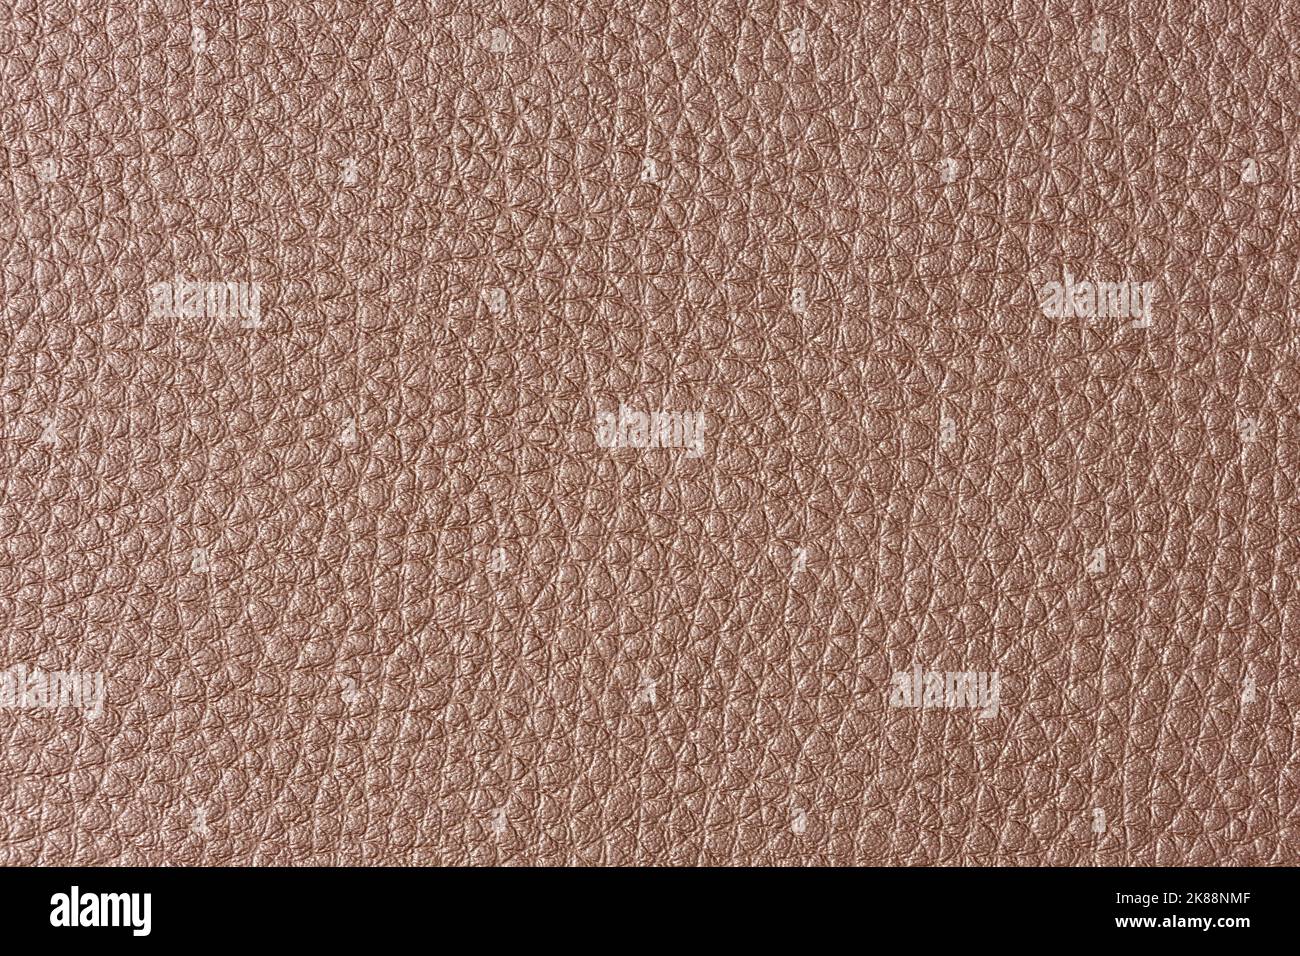 Brown Leather background texture. Full frame Stock Photo